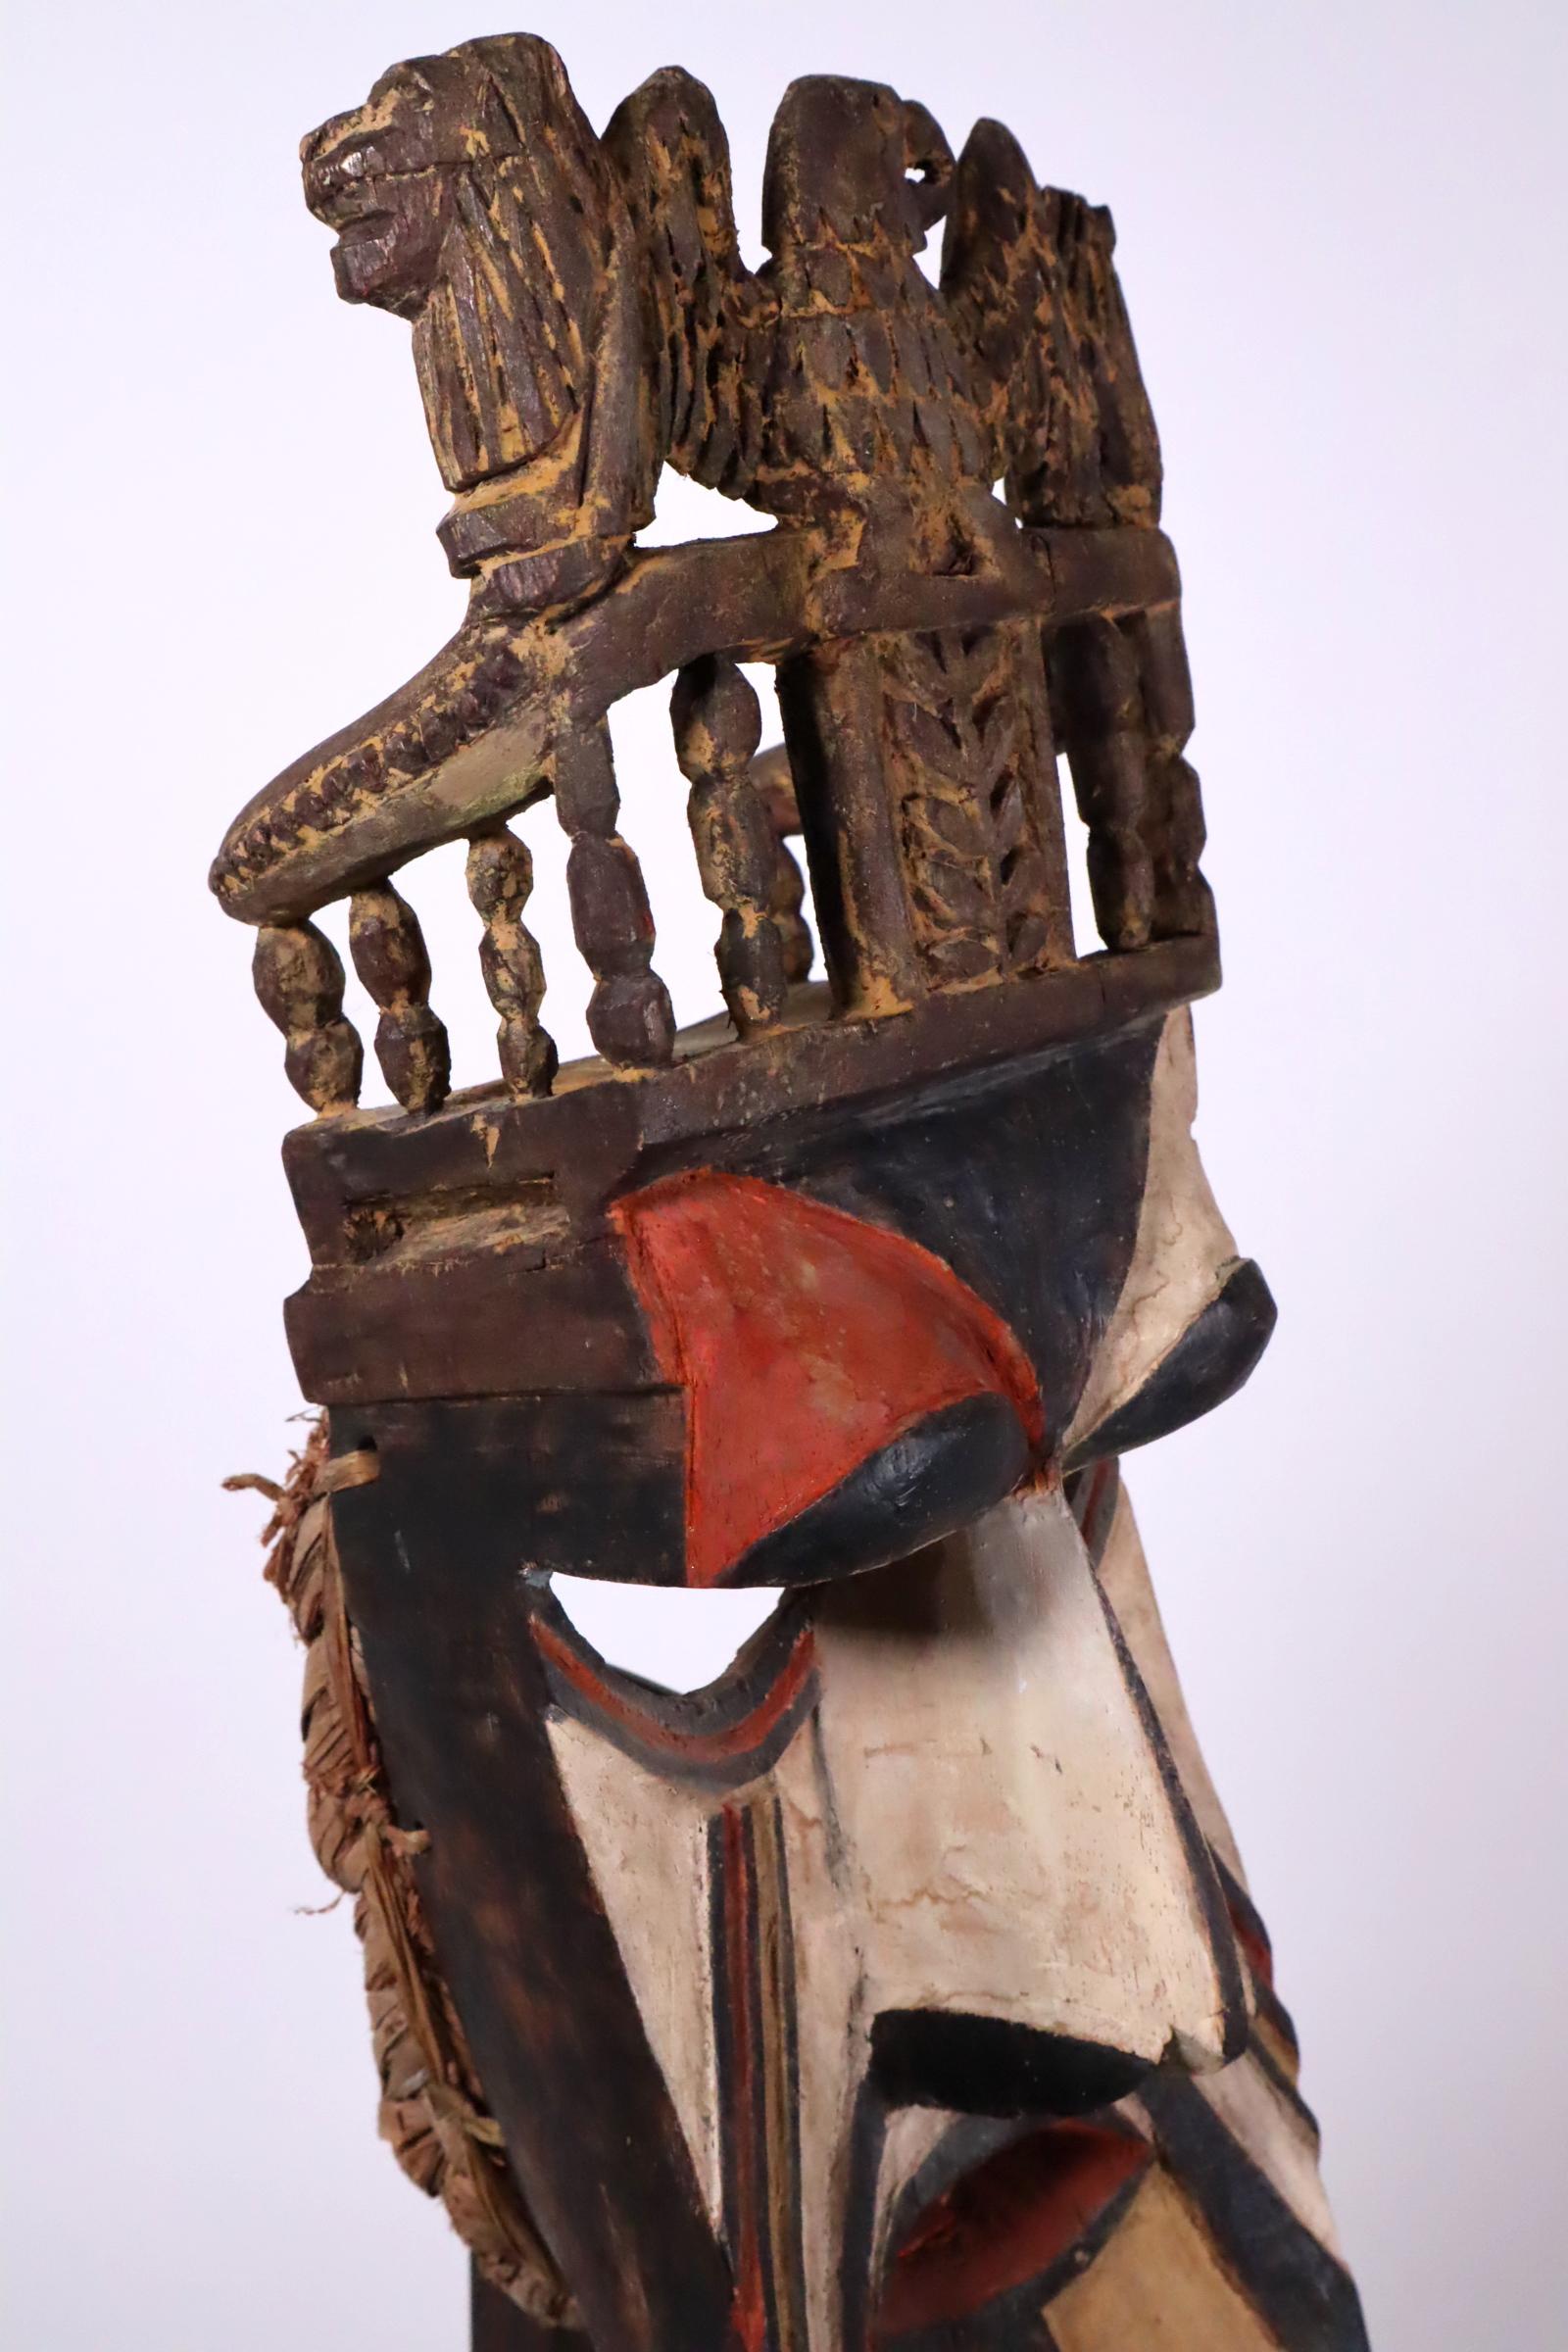 Paint Super Rare Type Igbo Afikpo Theater Mask with Throne Nigeria African Tribal Art For Sale